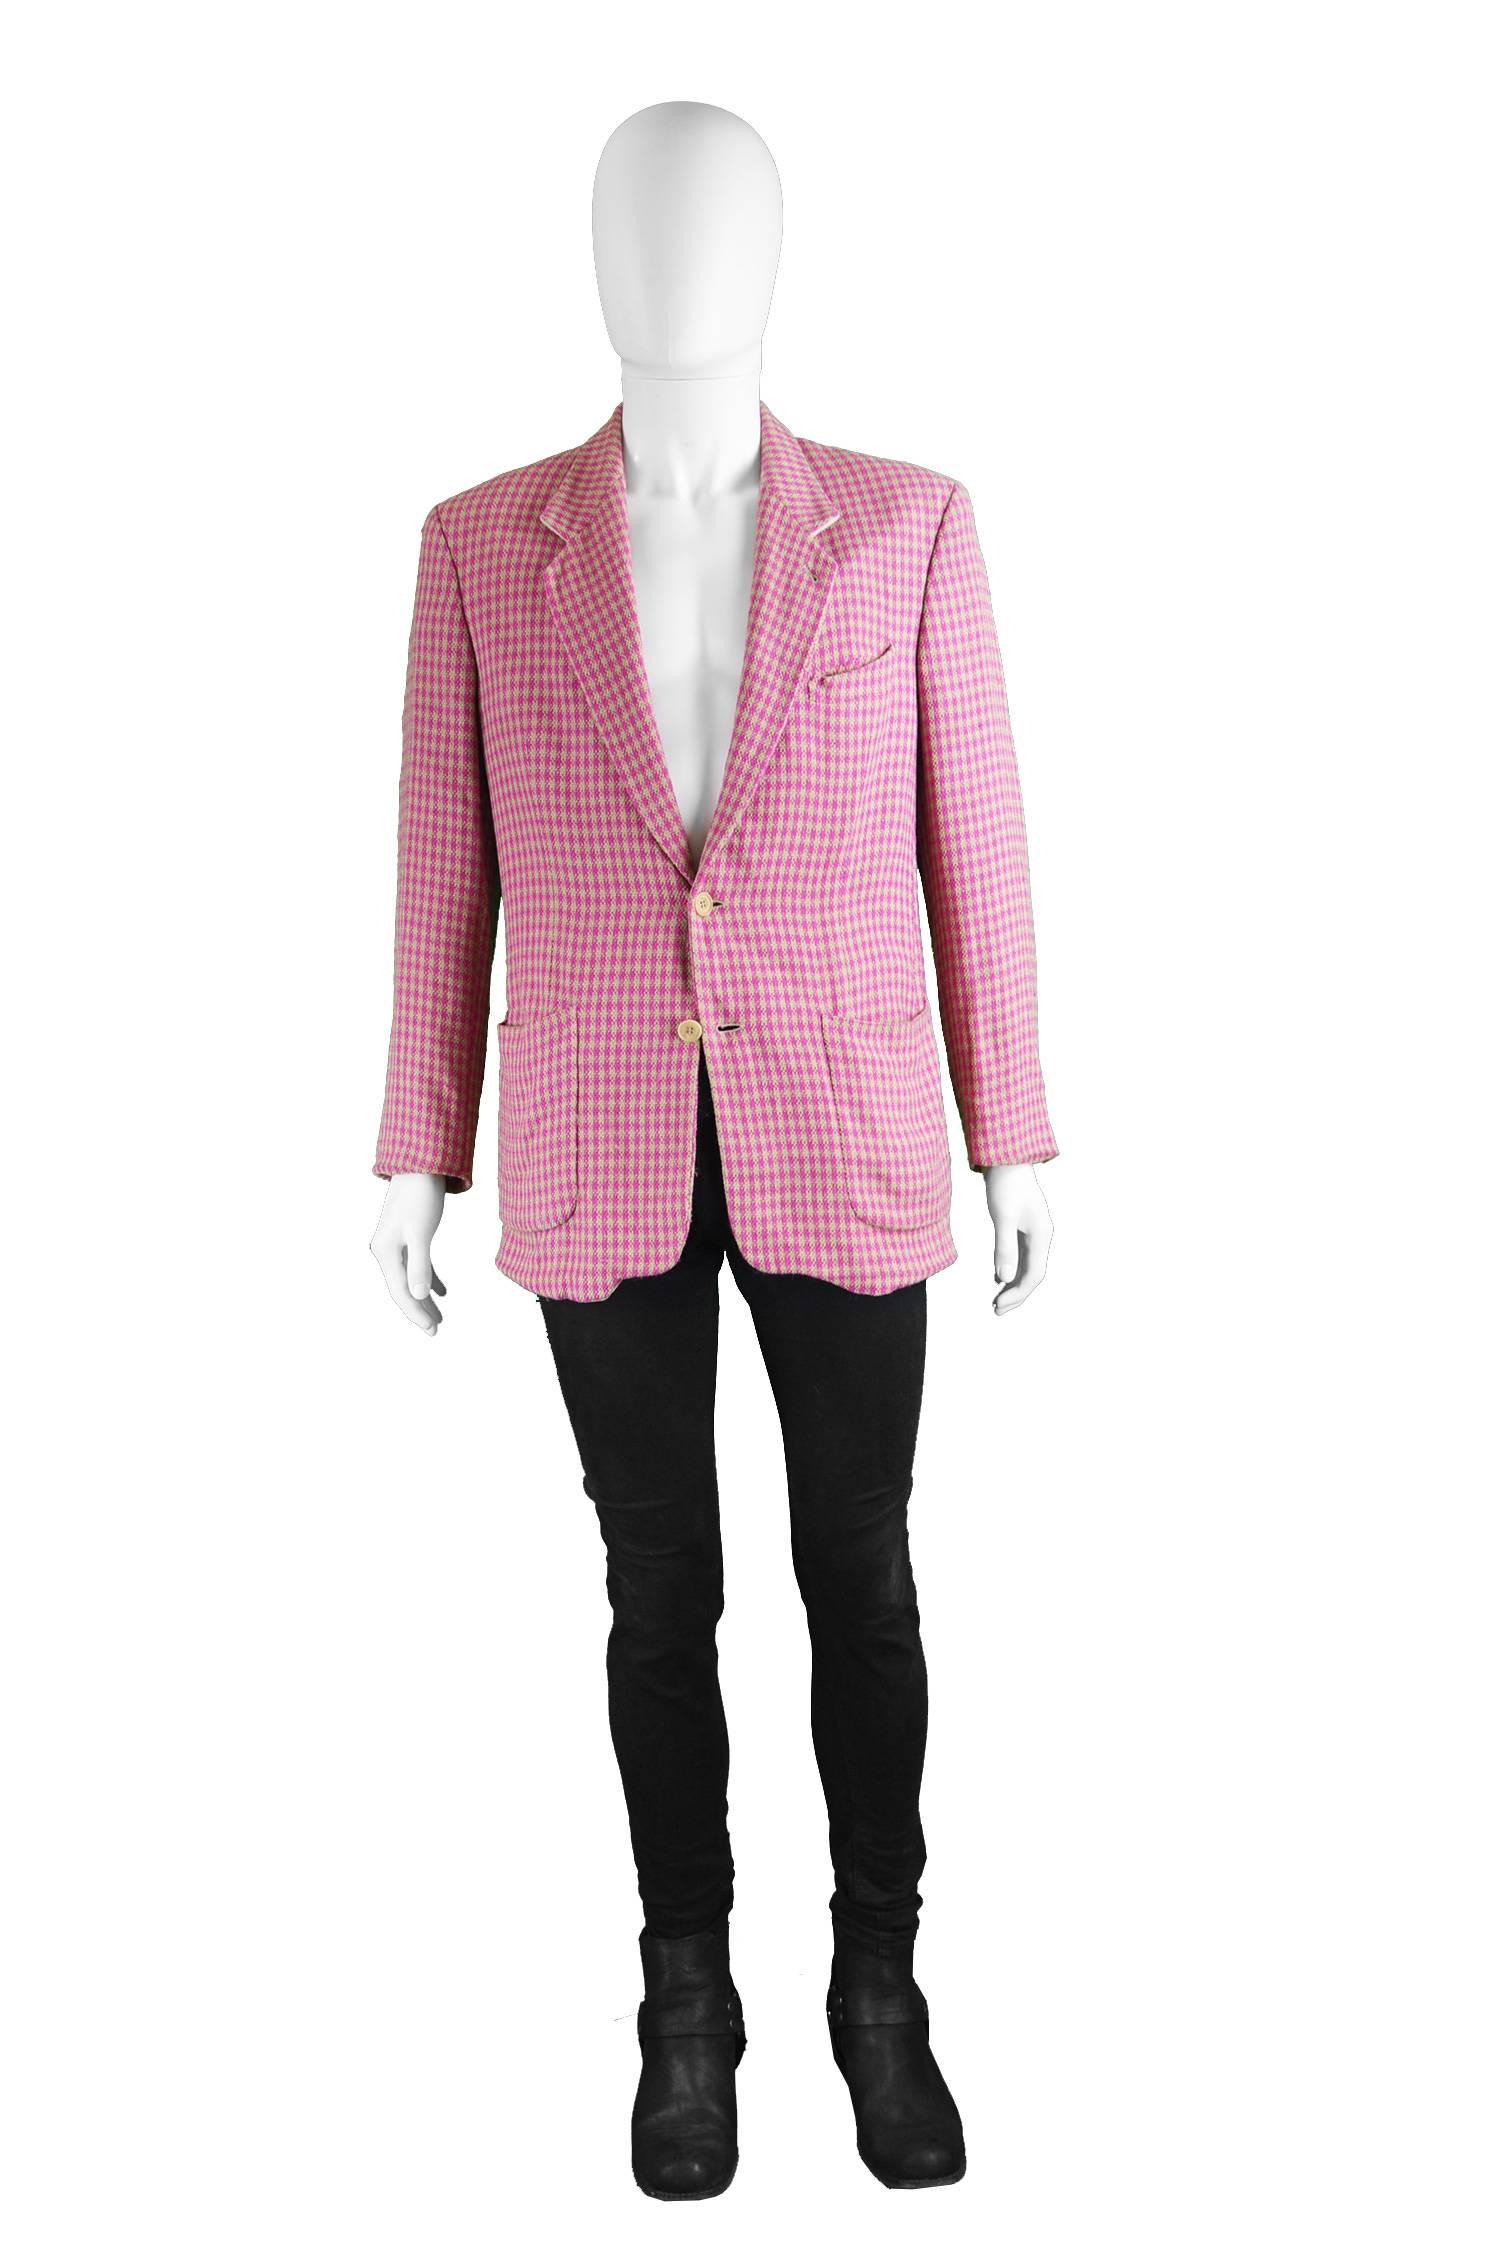 Byblos Vintage Men's Wool, Rayon & Silk Light Summer Blazer, 1990s

Estimated Size: Men's Large. Please check measurements.
Chest - 44” / 112cm (please remember to allow a couple of inches for movement)
Length (Shoulder to Hem) - 29” /